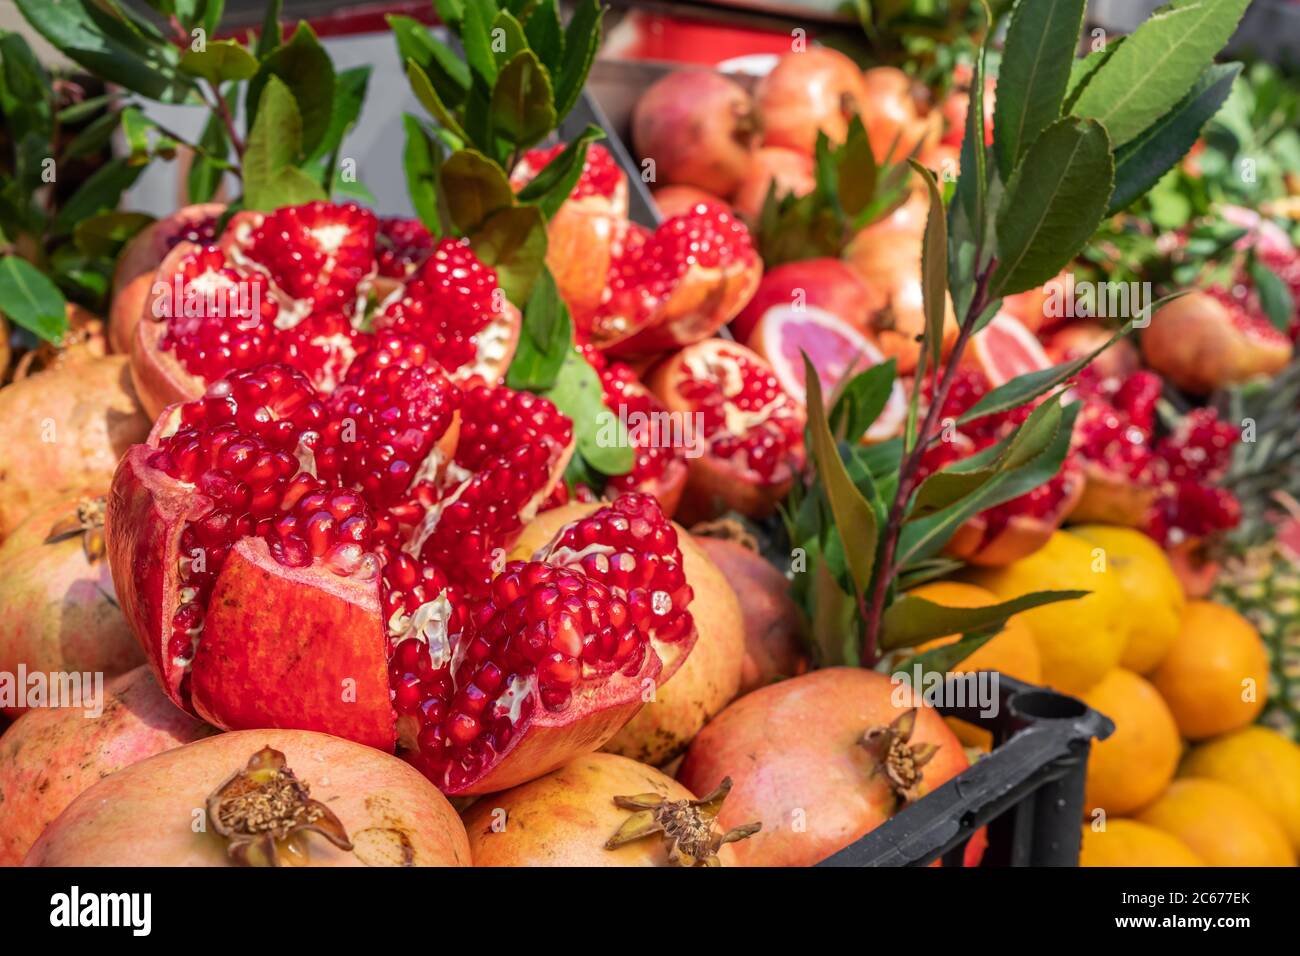 Ripe and juicy half peeled pomegranates ready to be squeezed for fresh juice Stock Photo